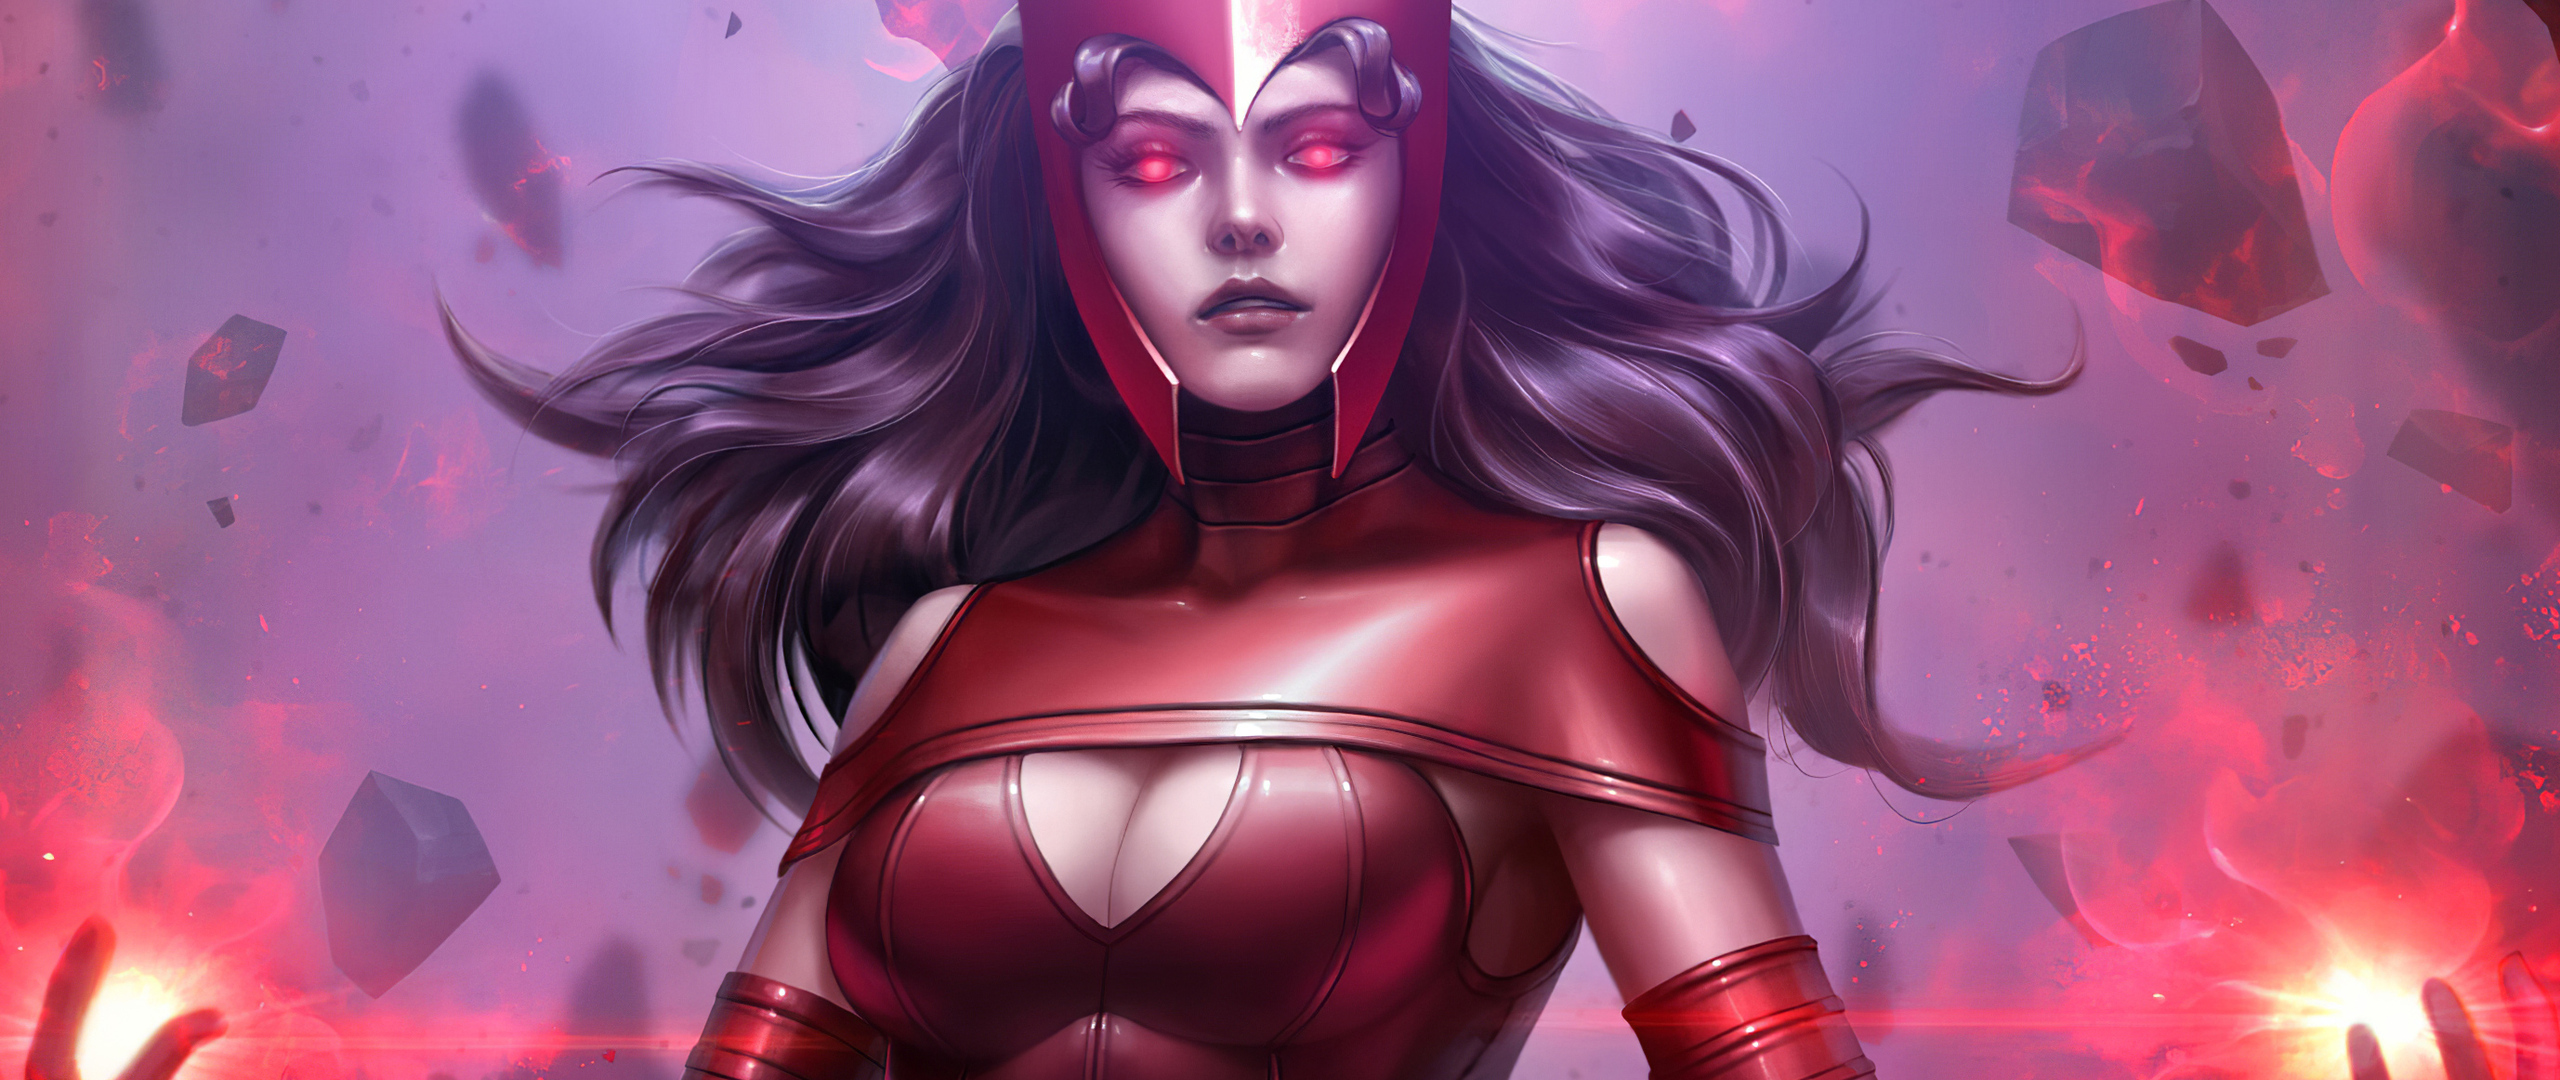 games-wallpapers. hd-wallpapers. scarlet-witch-wallpapers. 